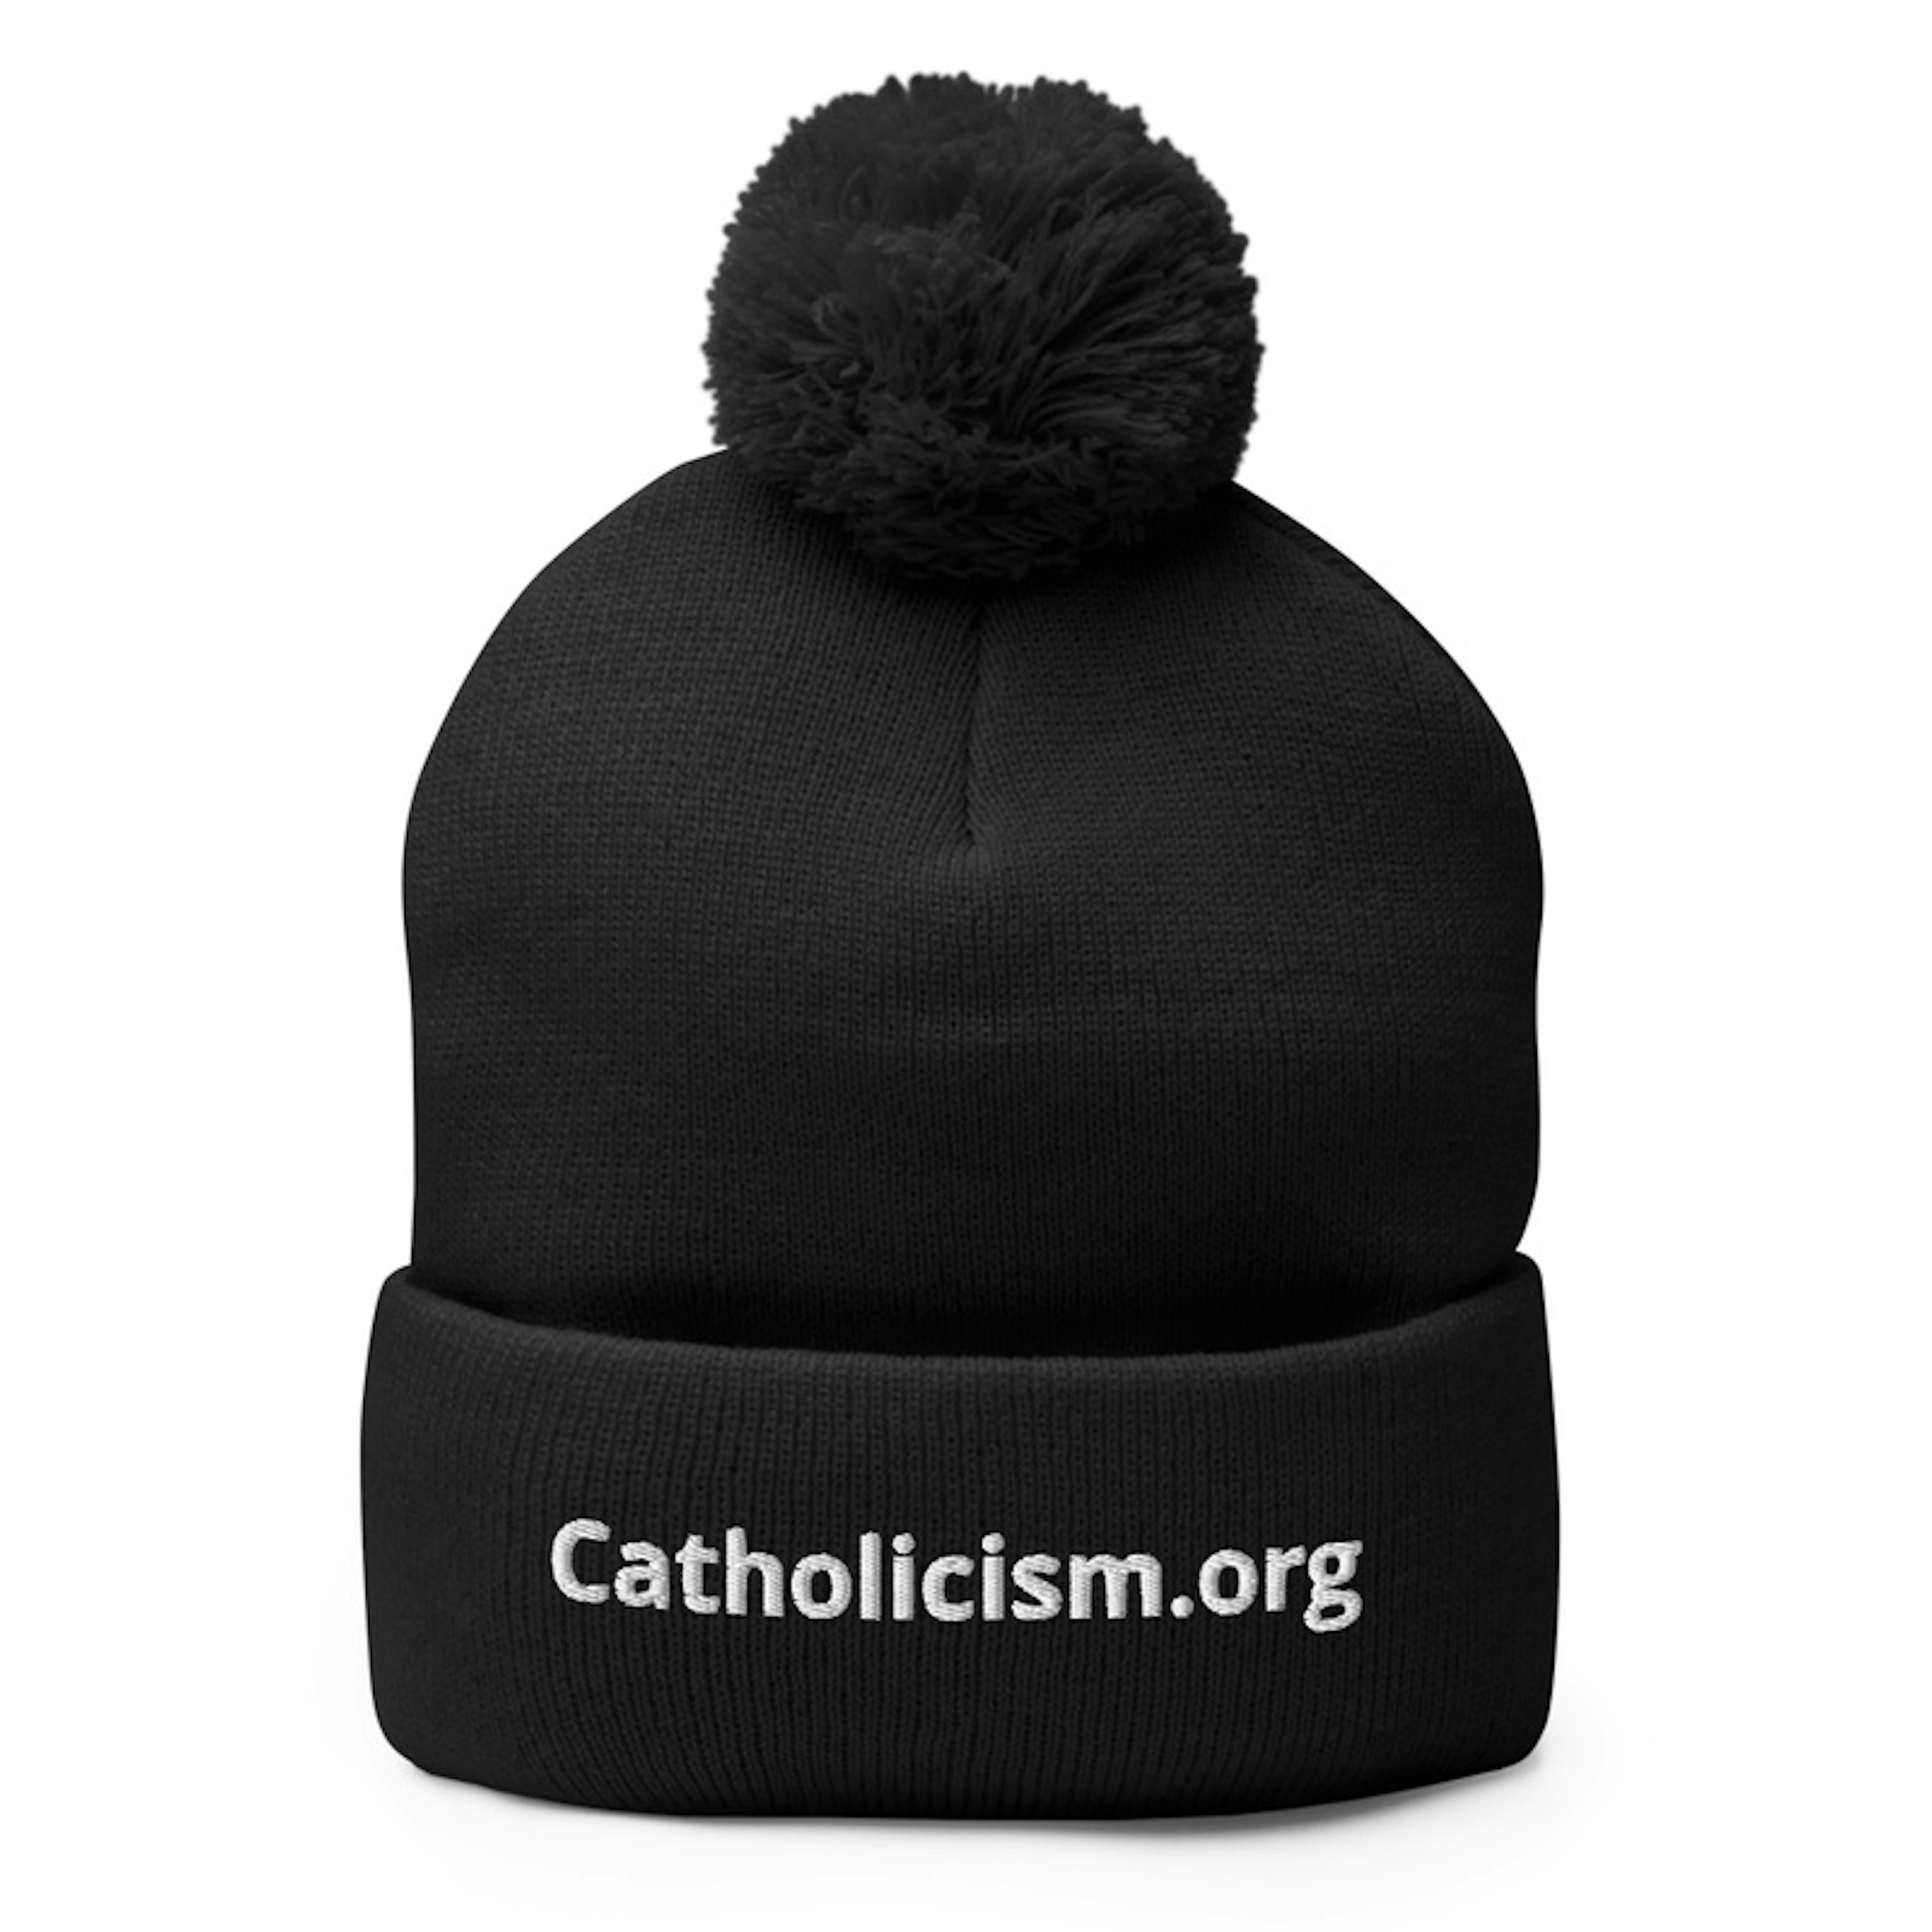 Beanie with catholicism.org